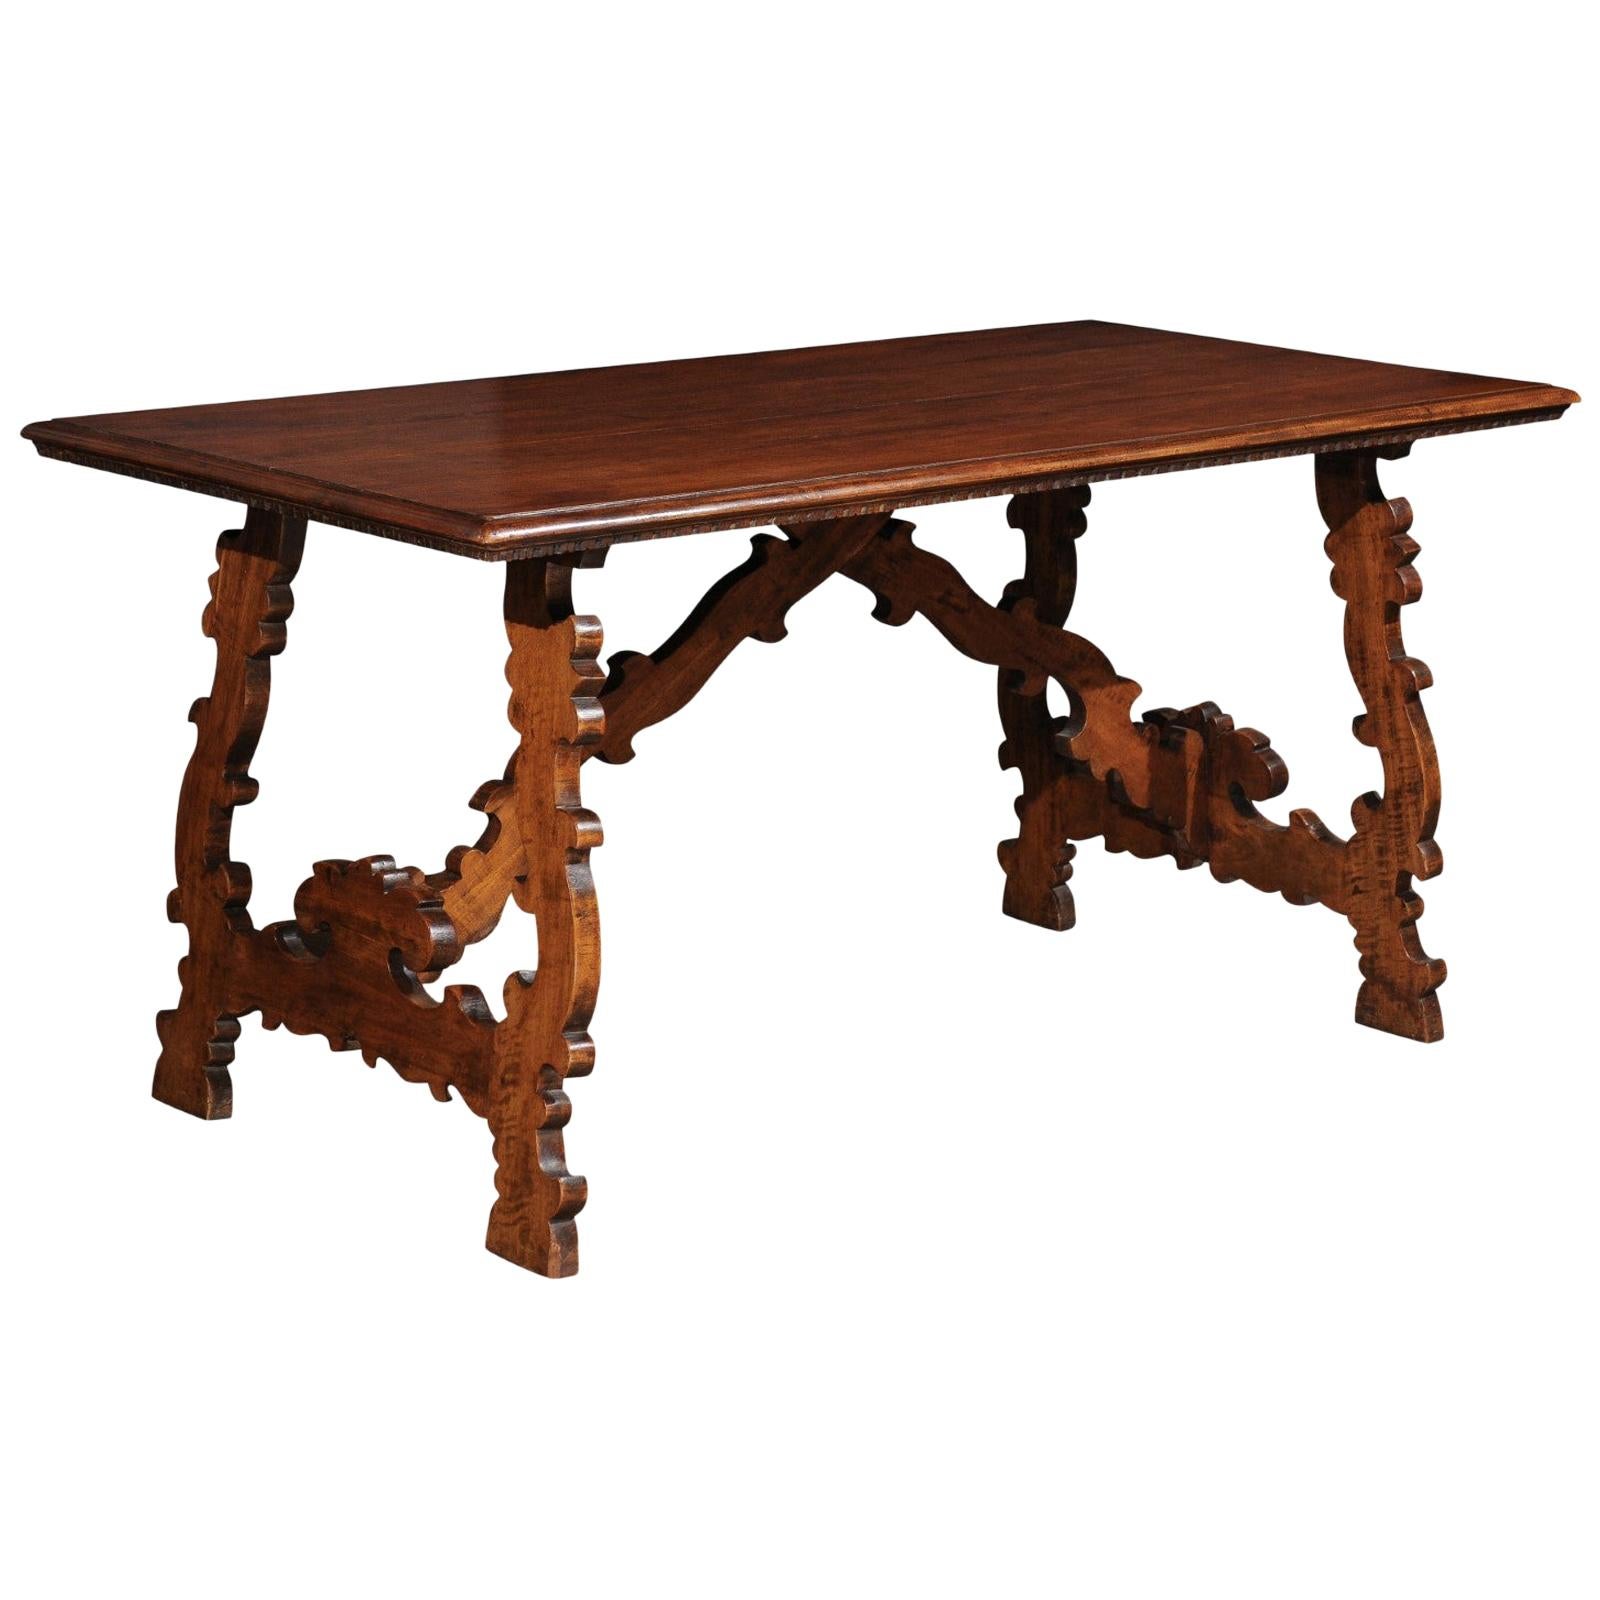 Spanish Baroque Style 19th Century Walnut Fratino Table with Carved Lyre Legs